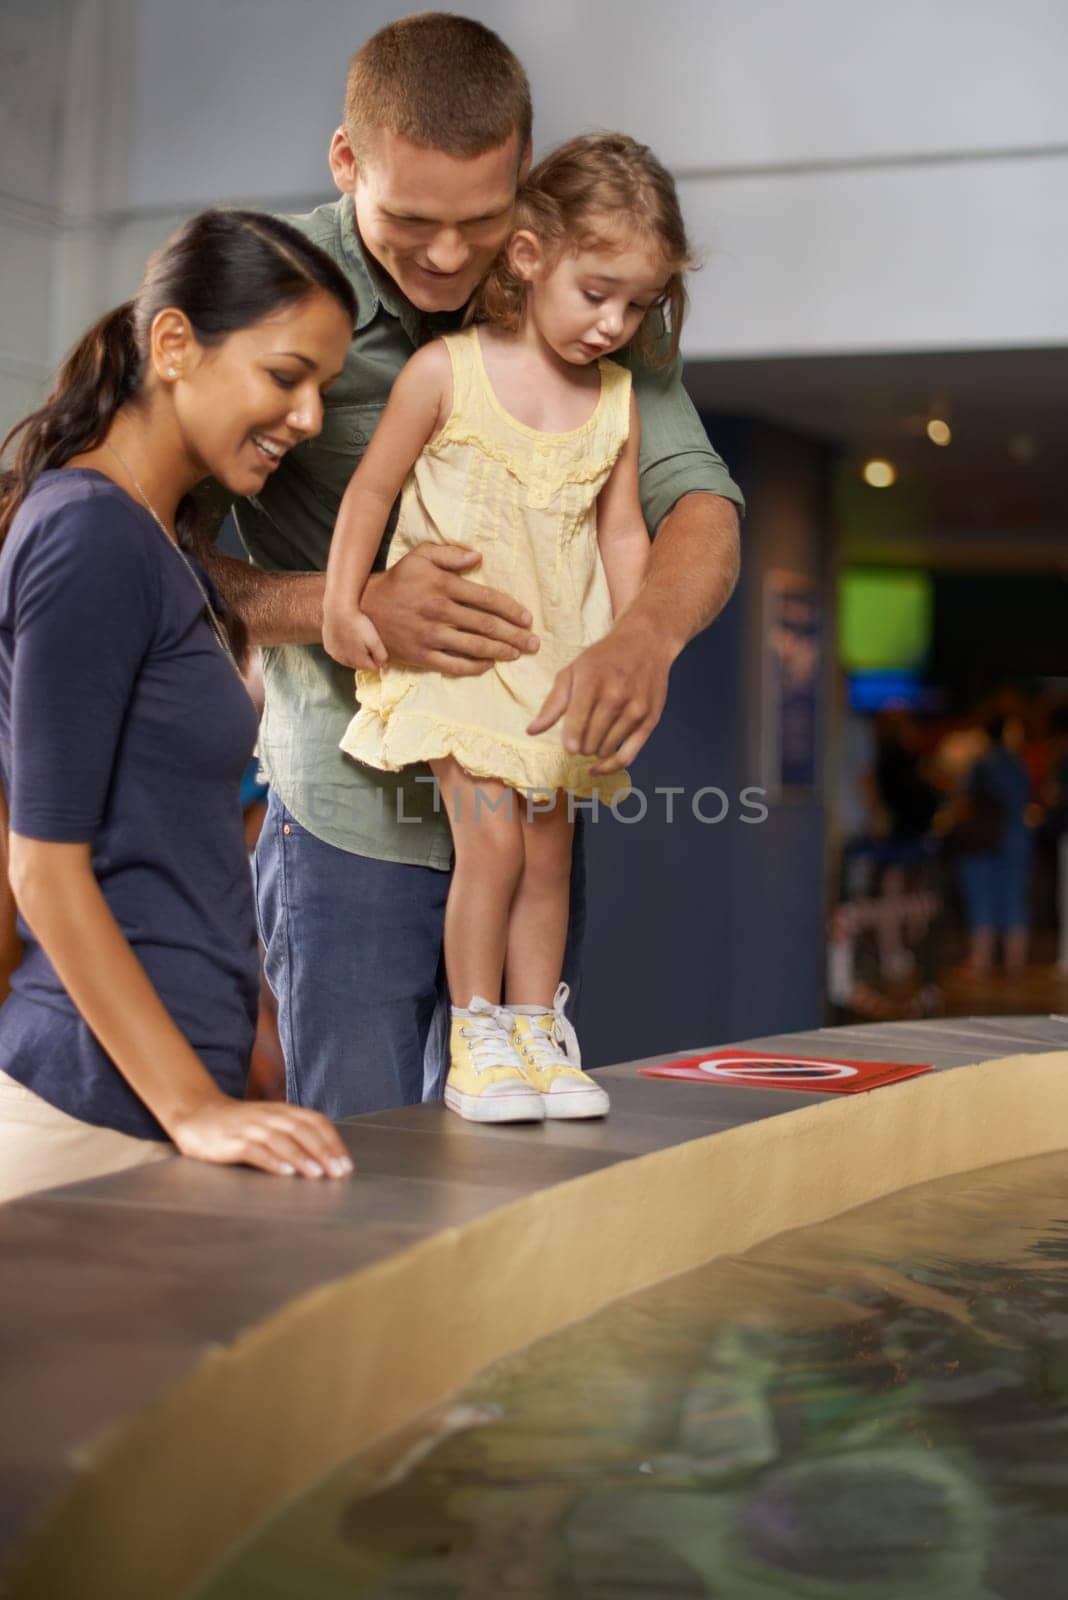 Happy family, little girl and aquarium with water for sightseeing, travel or tour at the zoo. Mother, father and child or kid looking at sea creature, fish or explore exhibit for bonding or holiday.